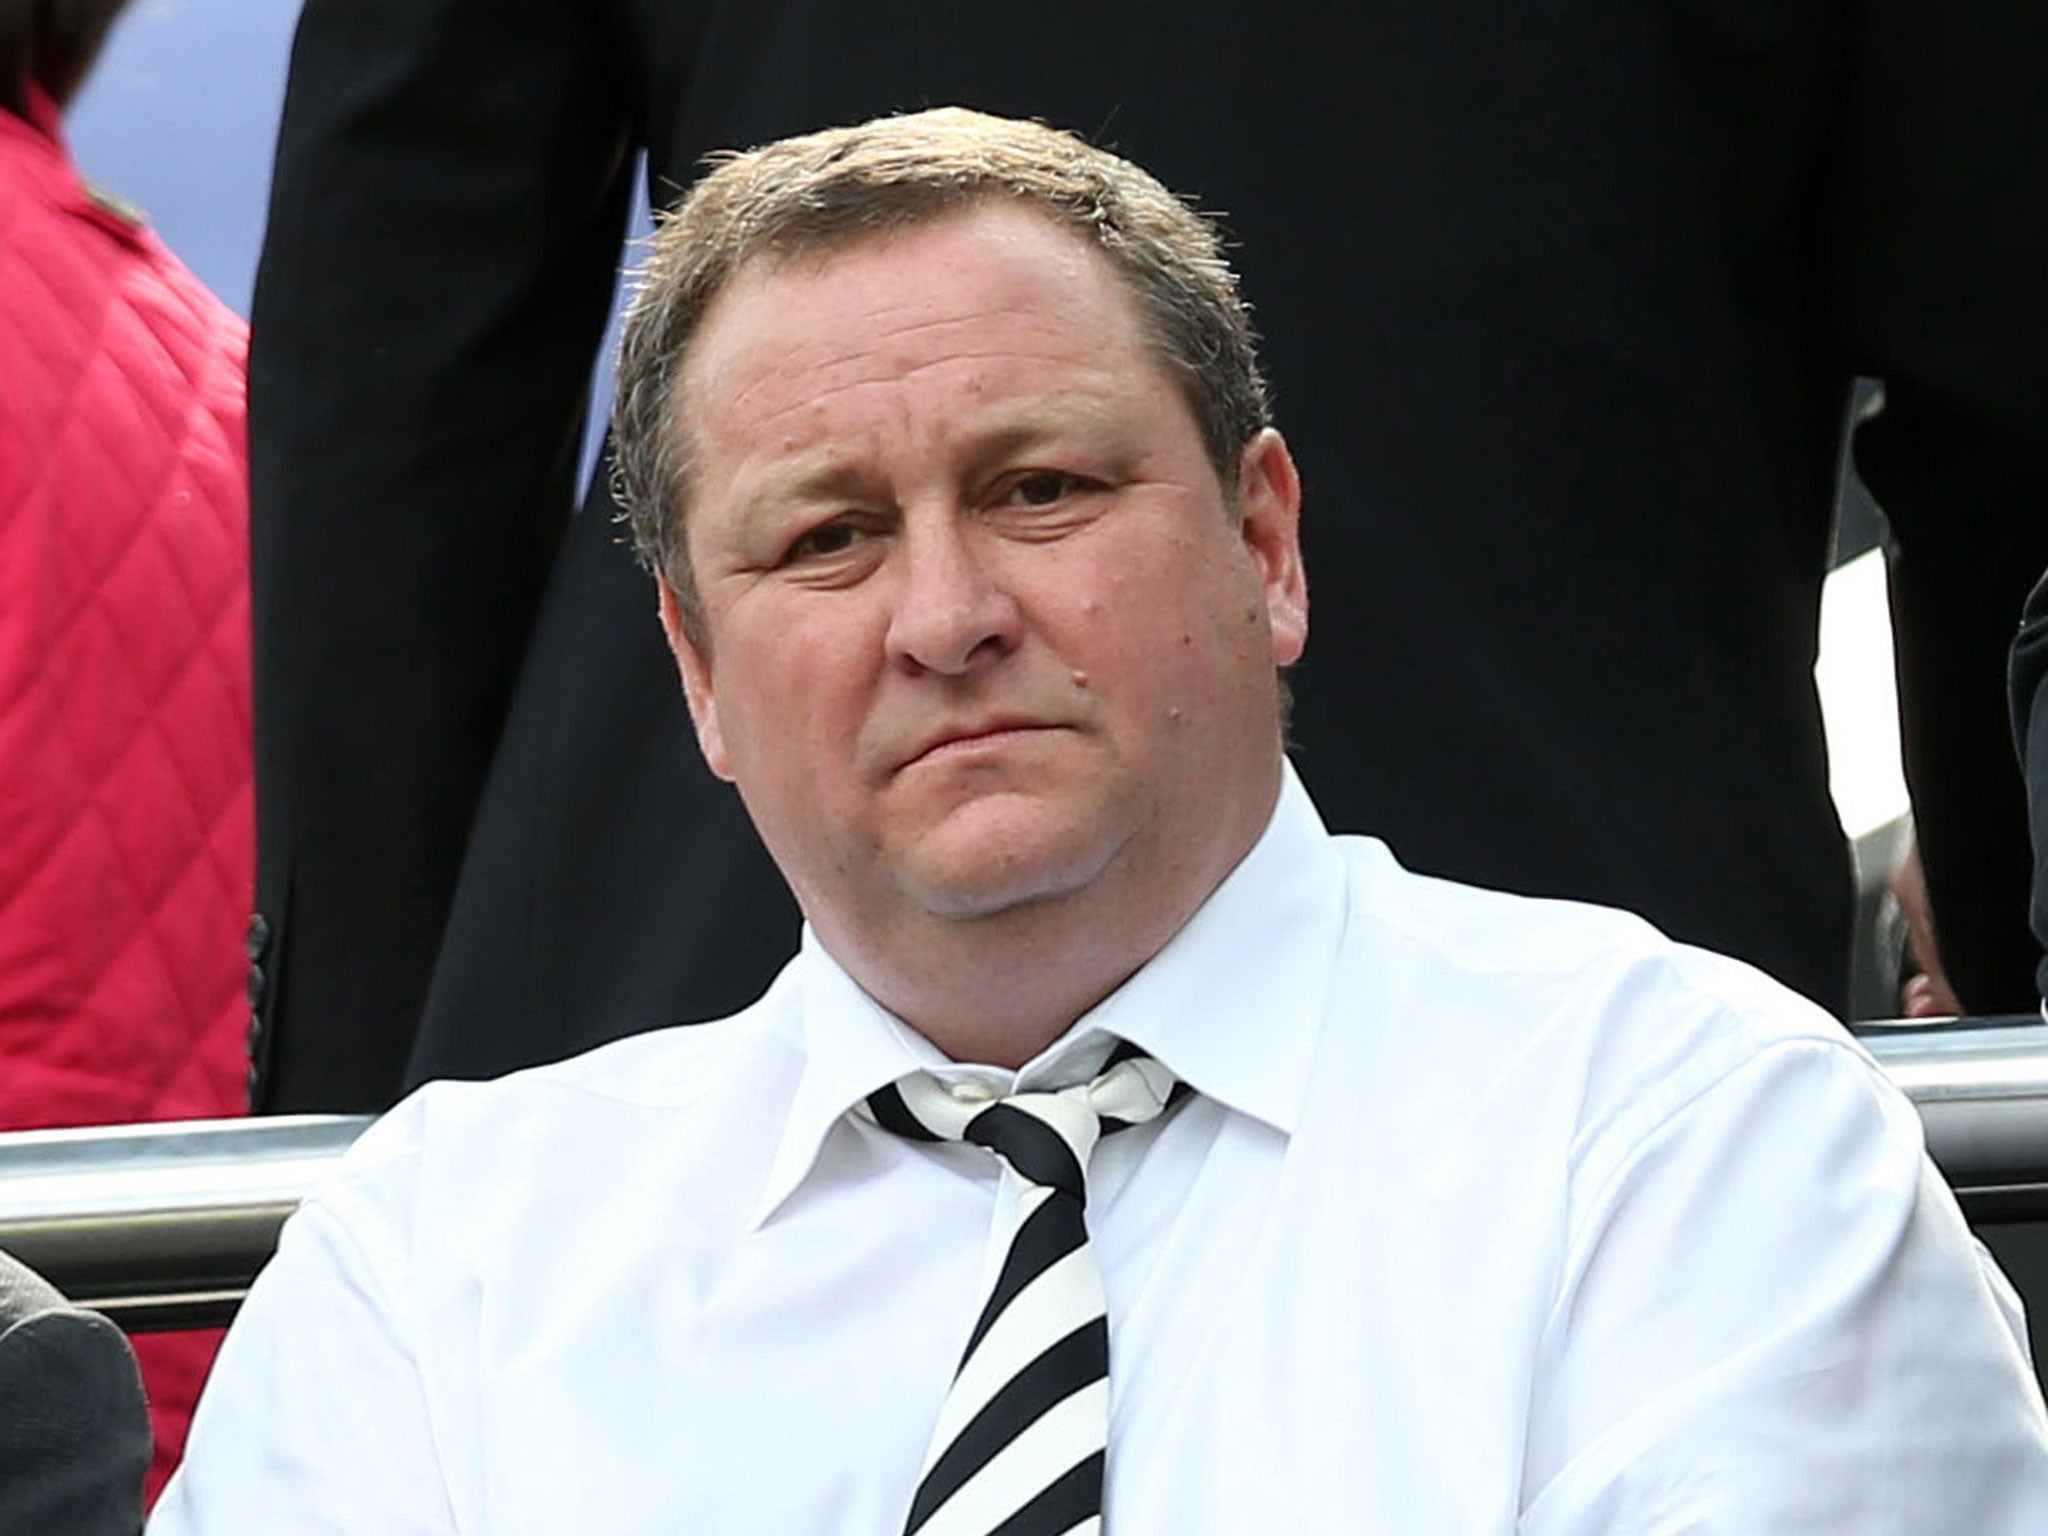 The Sports Direct owner, Mike Ashley, could avoid a grilling by MPs about the collapse of his fashion chain USC